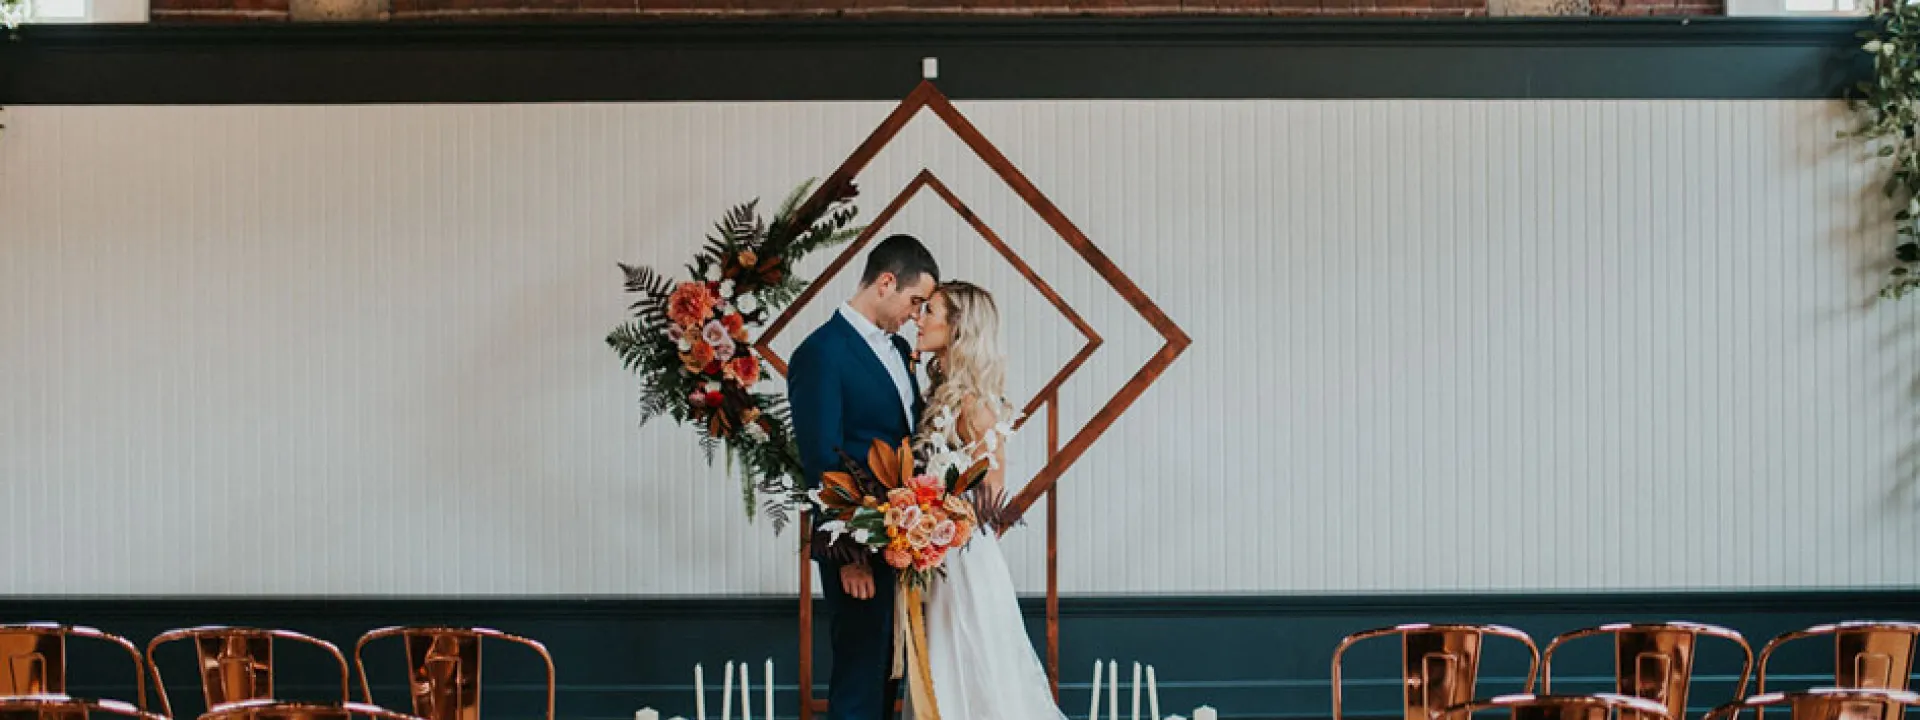 A geometric arch with tropical florals as a ceremony backdrop at The Evergreen in Portland